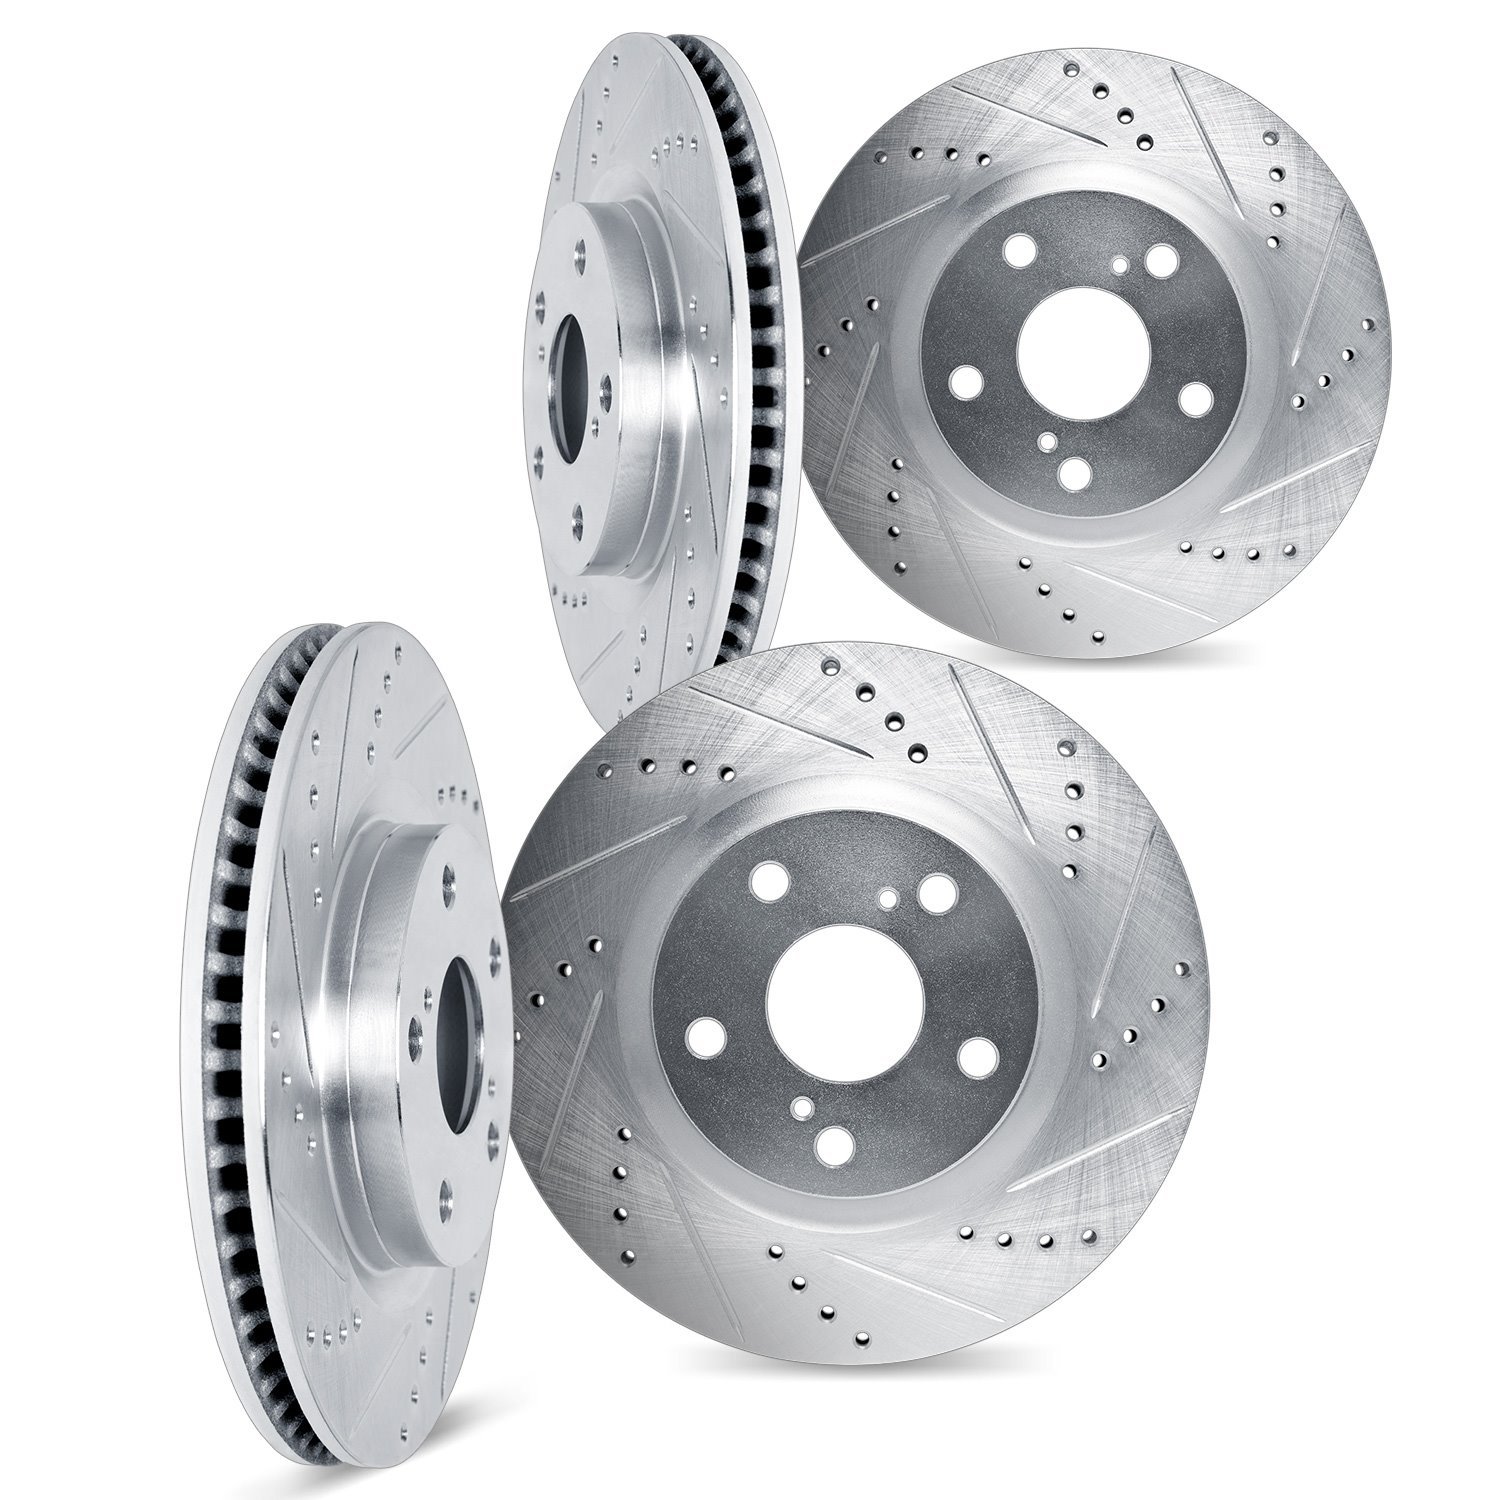 Drilled/Slotted Brake Rotors [Silver], 1991-1996 Lexus/Toyota/Scion